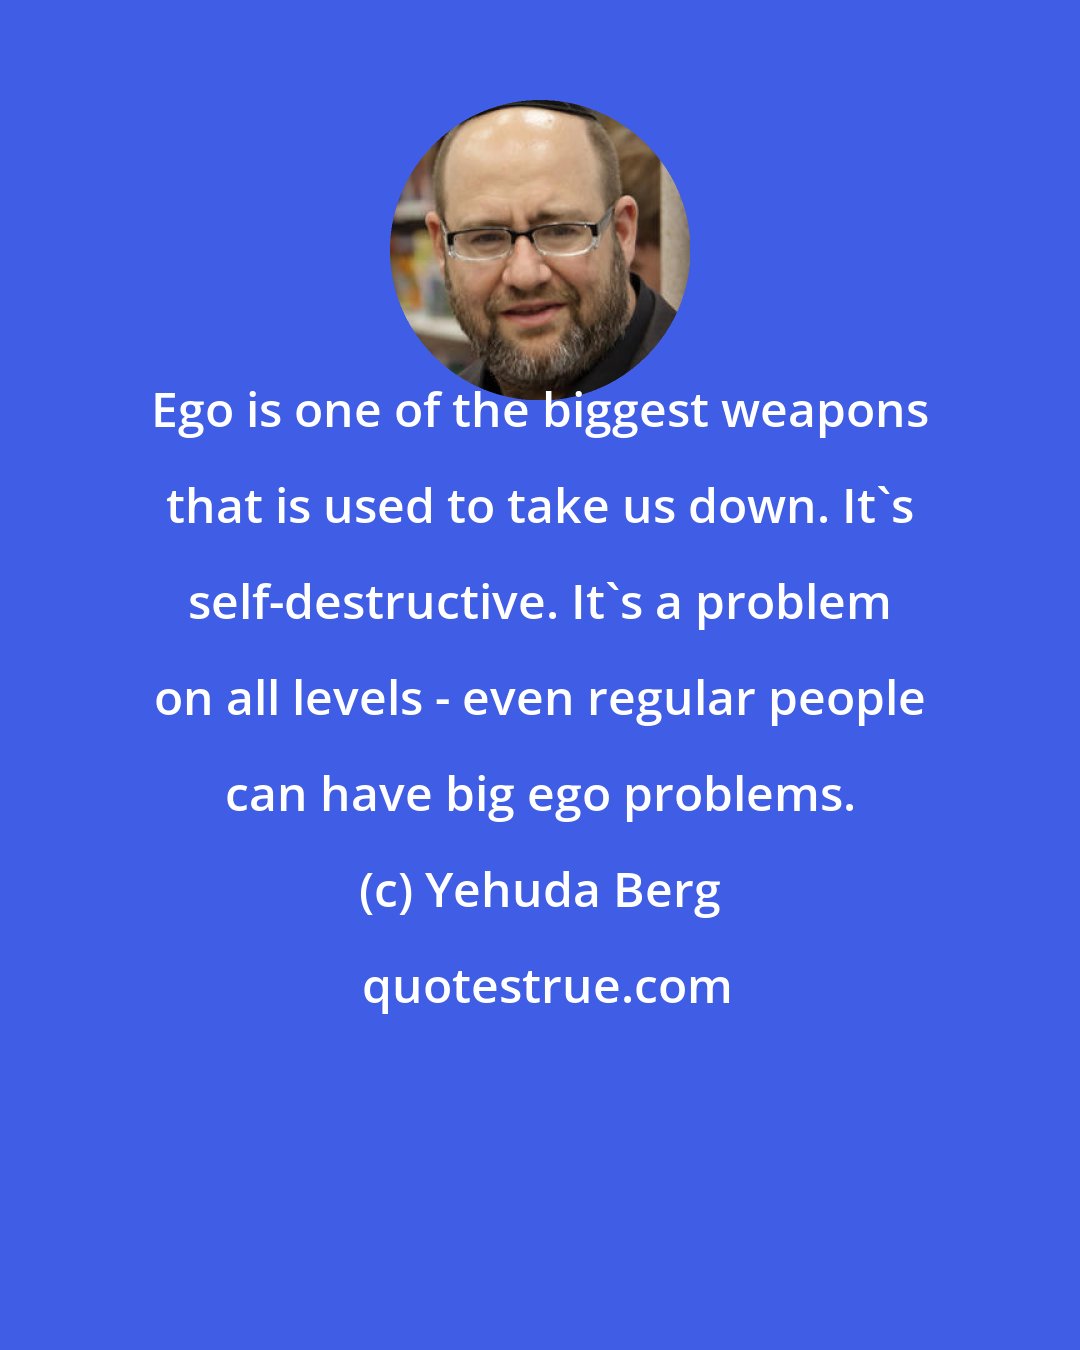 Yehuda Berg: Ego is one of the biggest weapons that is used to take us down. It's self-destructive. It's a problem on all levels - even regular people can have big ego problems.